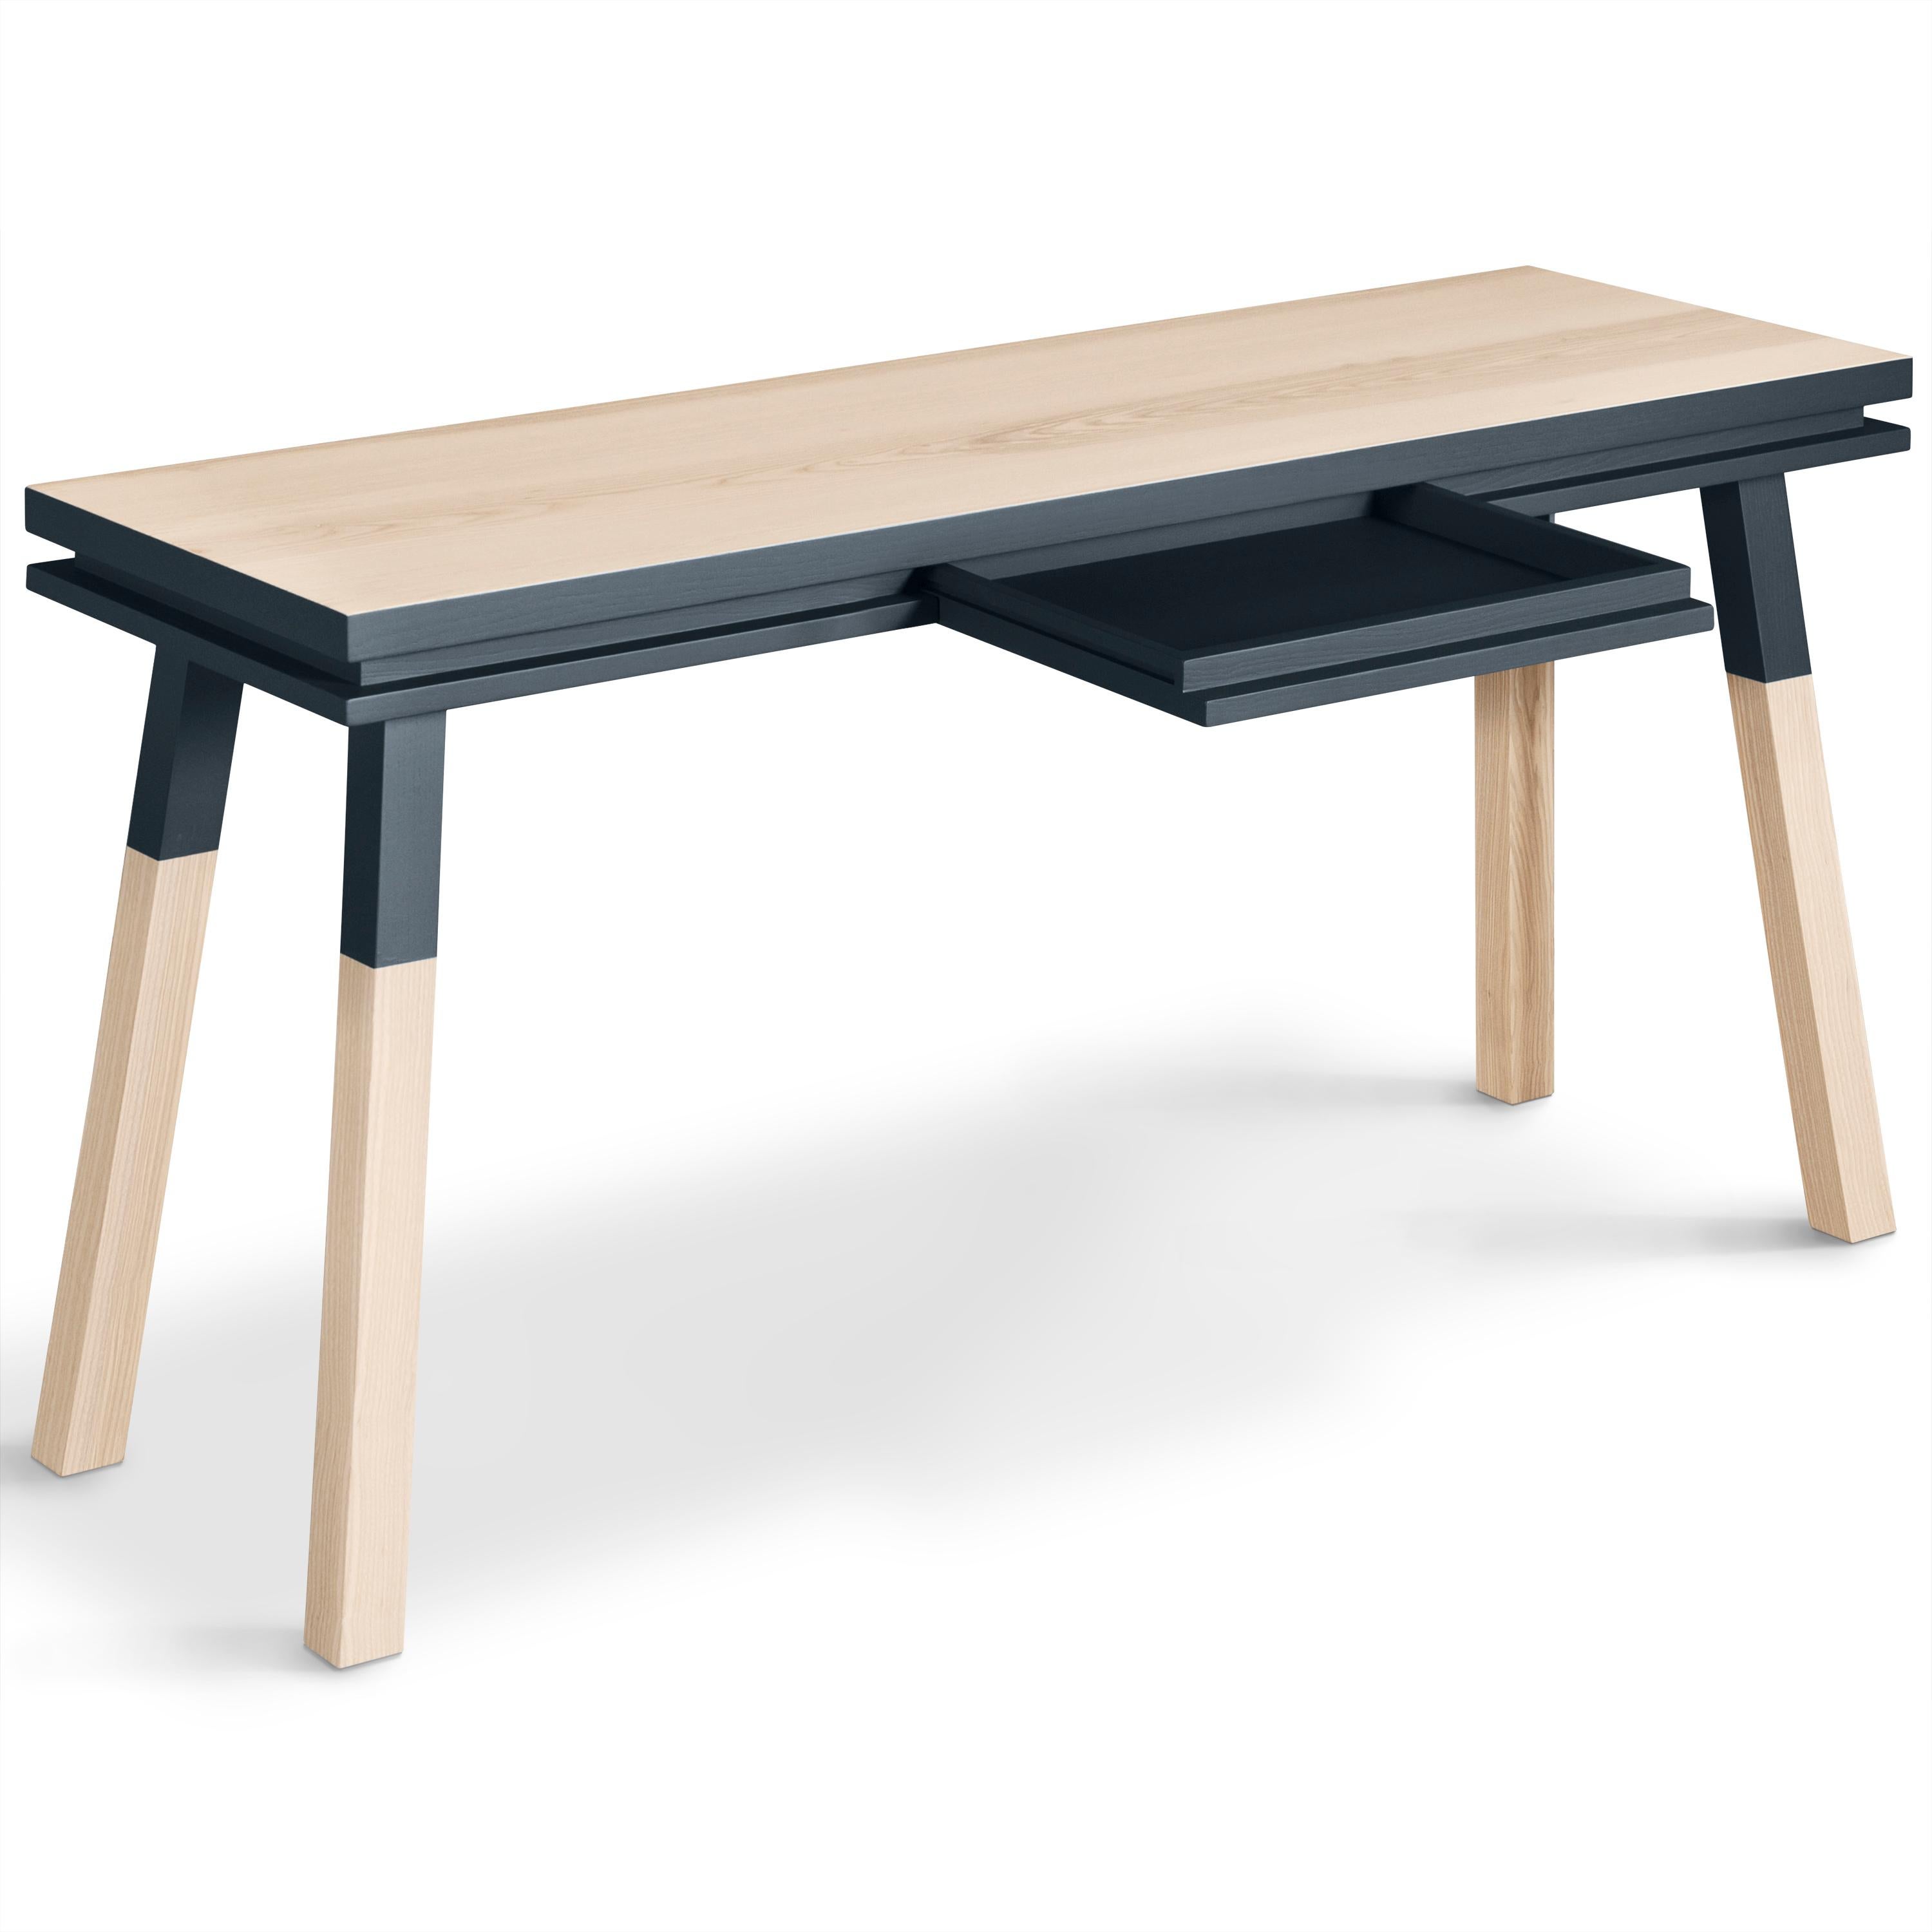 Wood Dark Blue rectangular table in solid wood, design by Eric Gizard, Paris For Sale